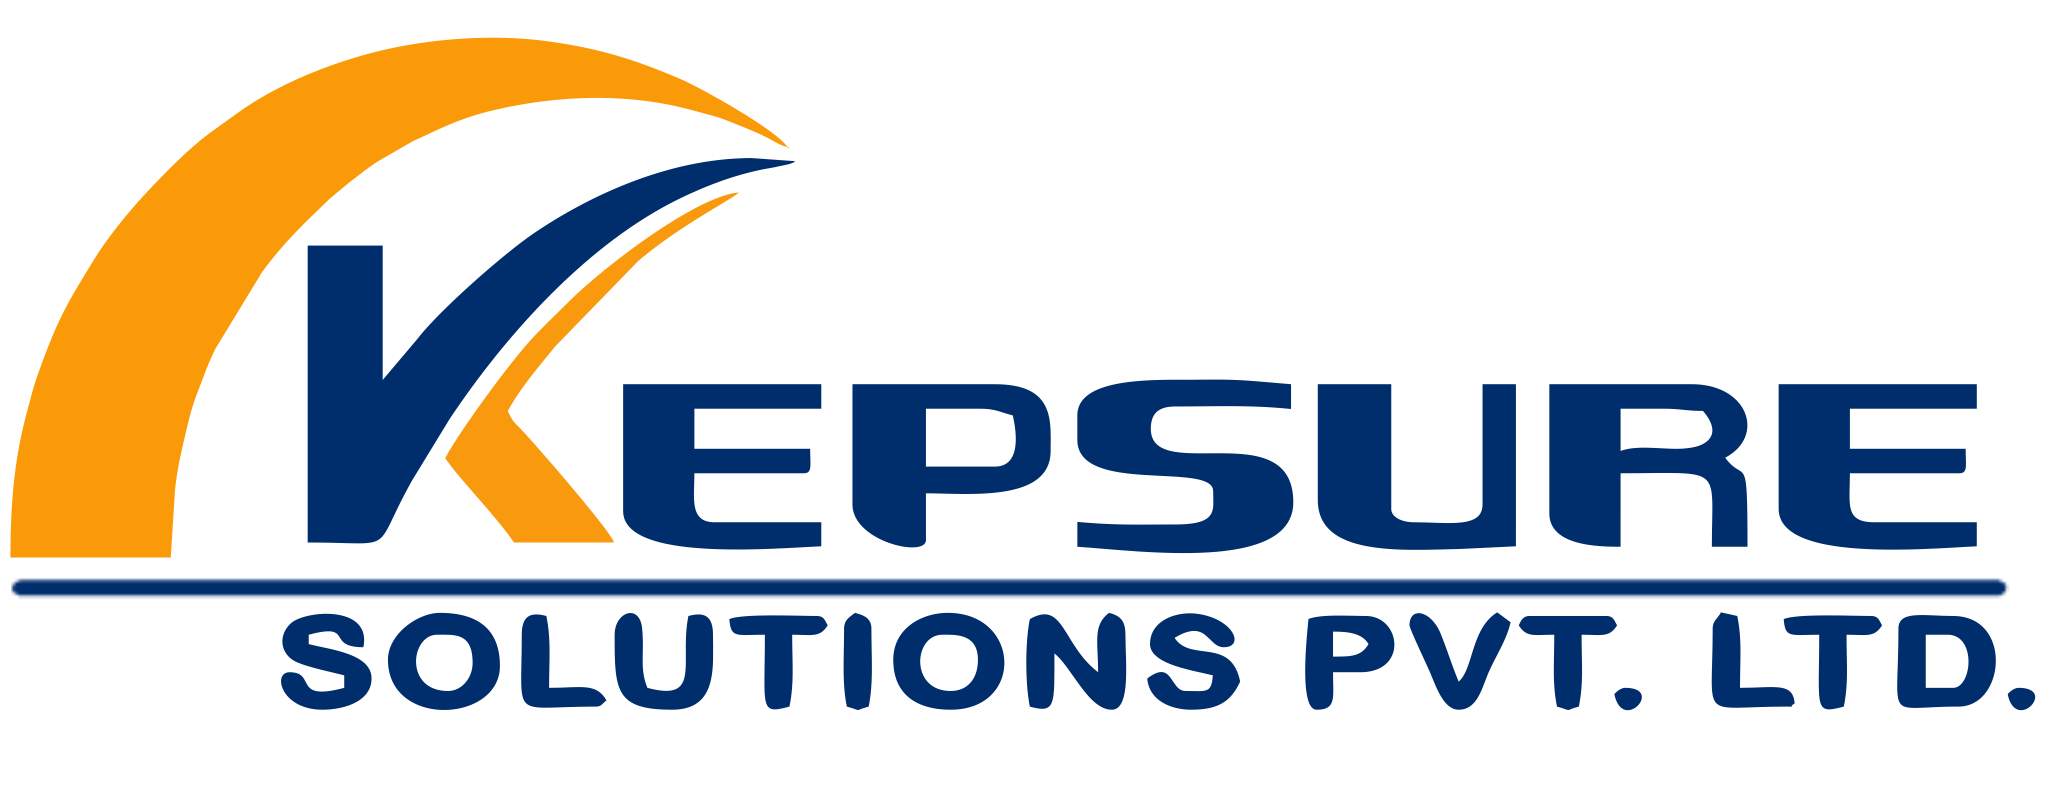 Kepsure Solutions